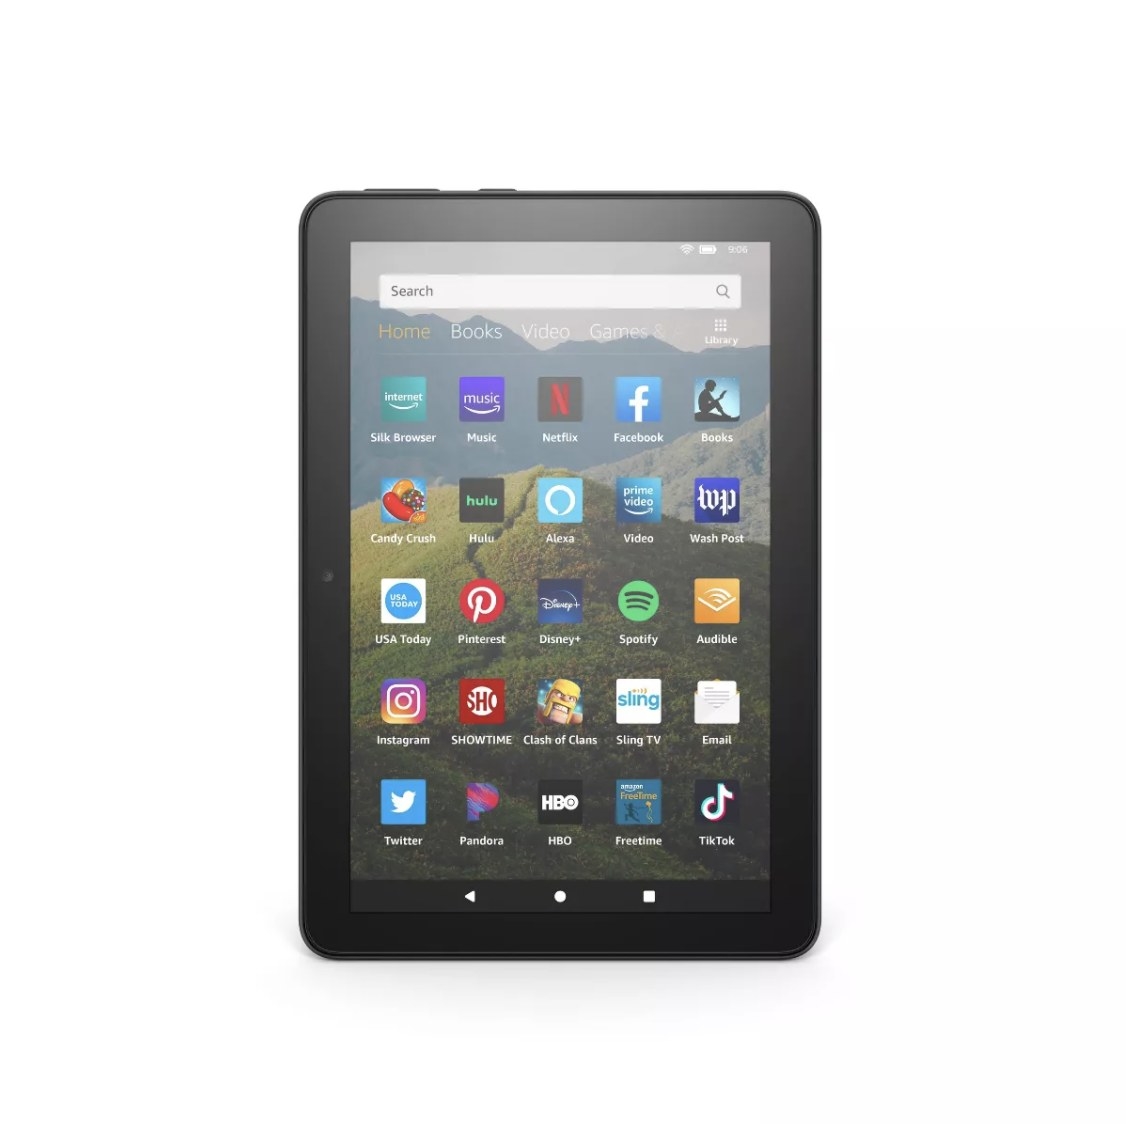 The Amazon Fire Tablet